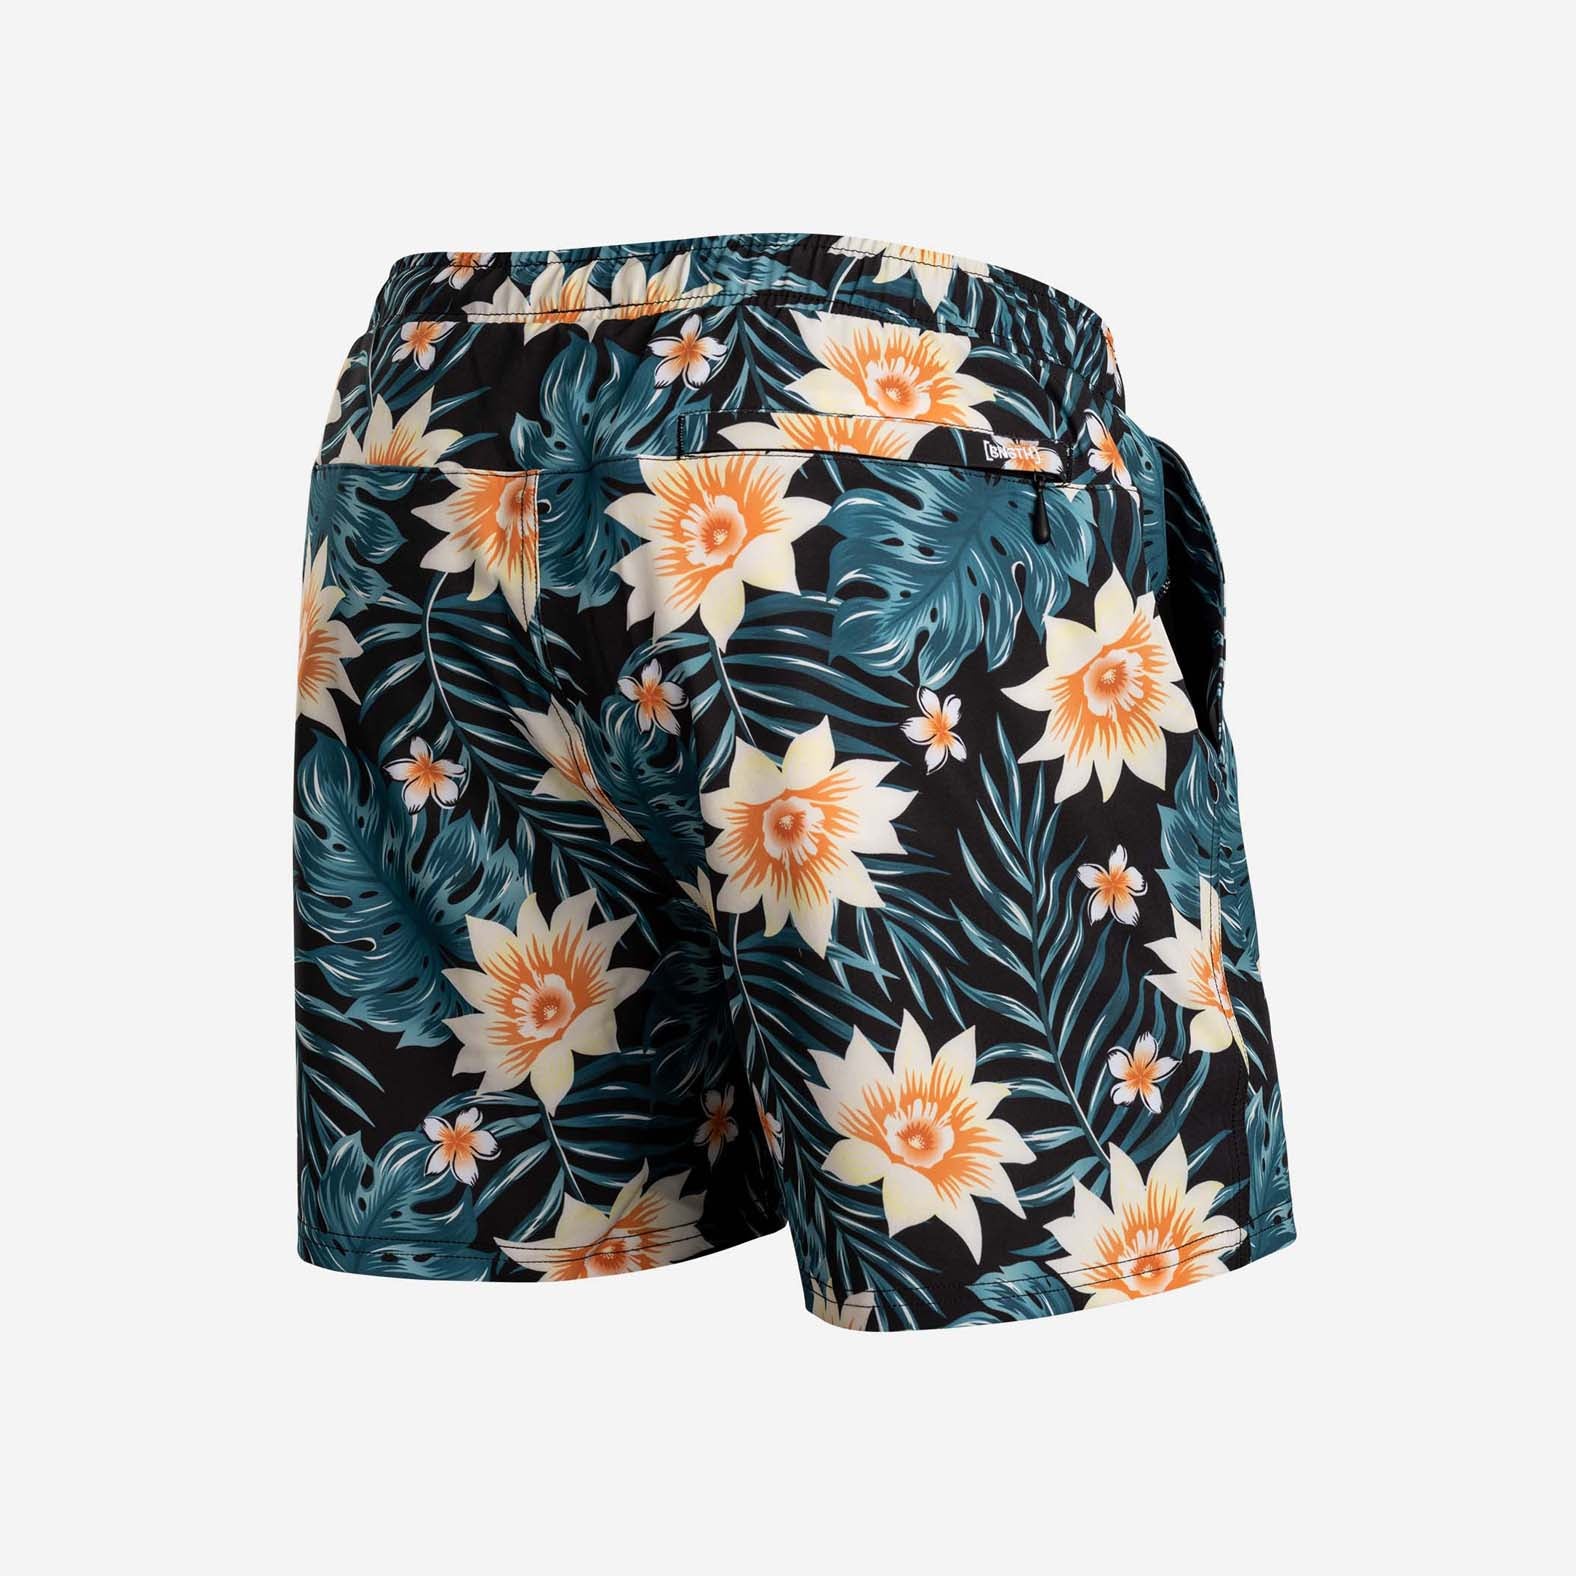 Back again with the flowy shorts (link in bio)